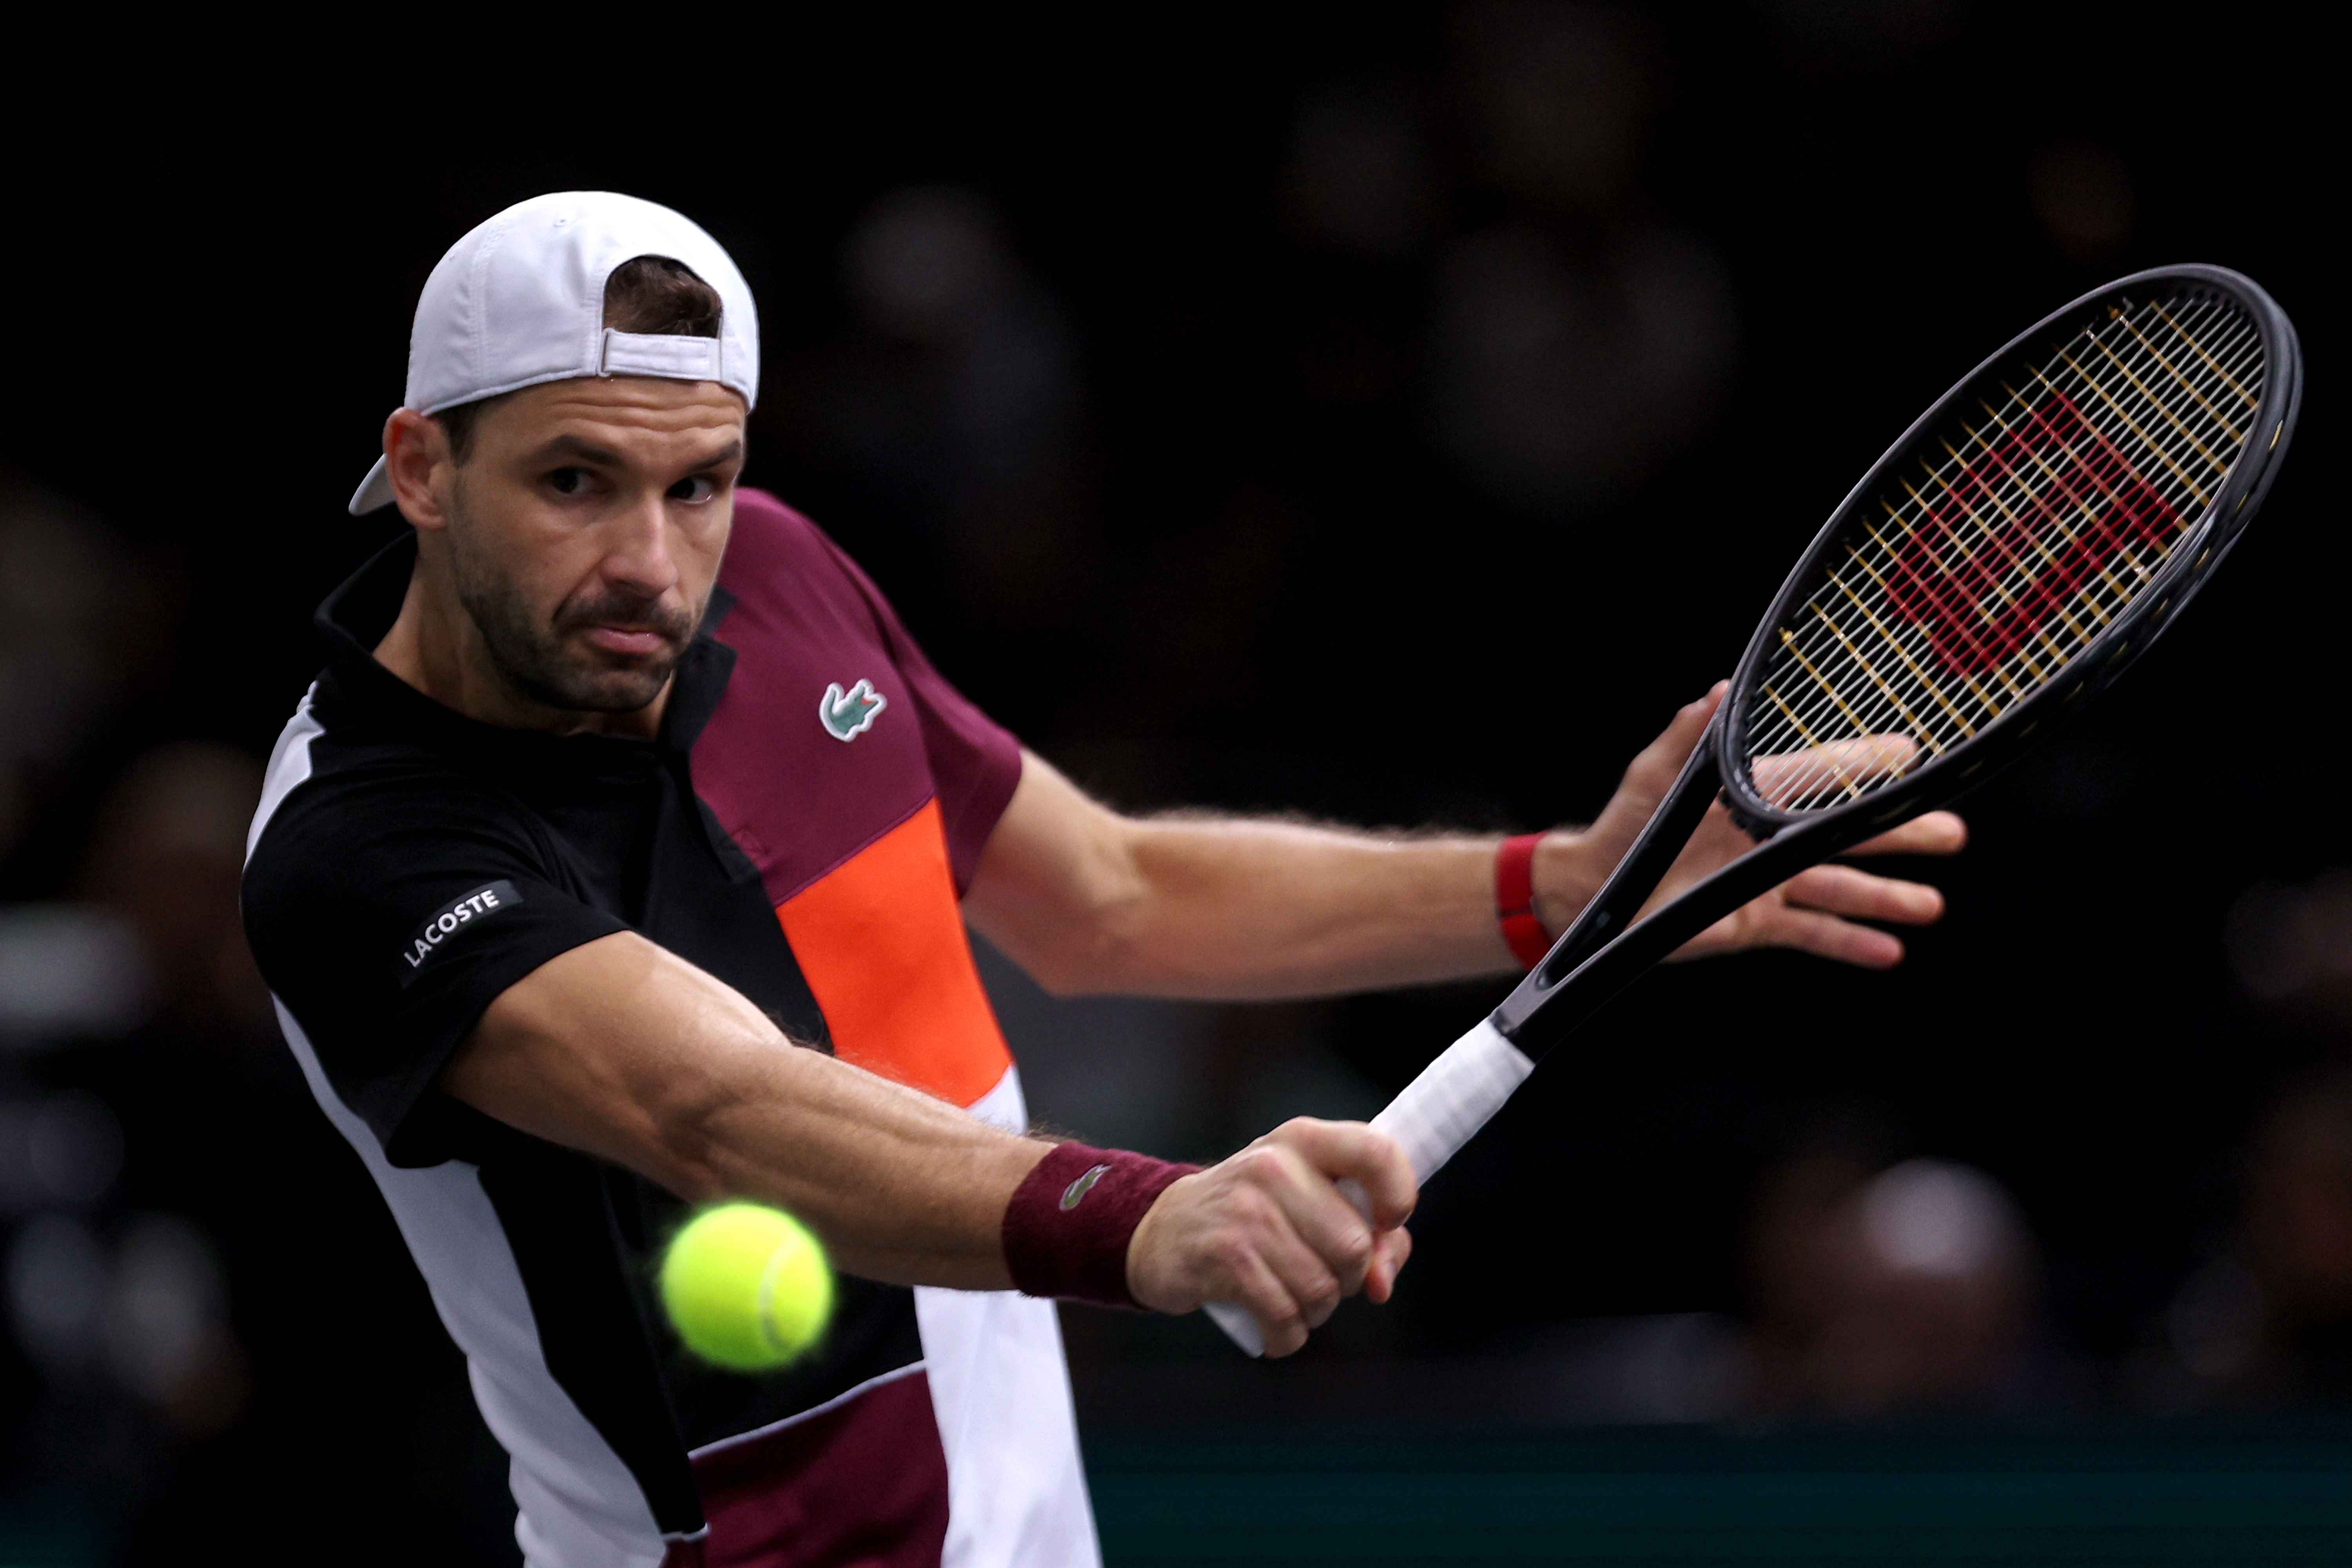 Dimitrov beats Musetti to make the second round - Tennis Majors